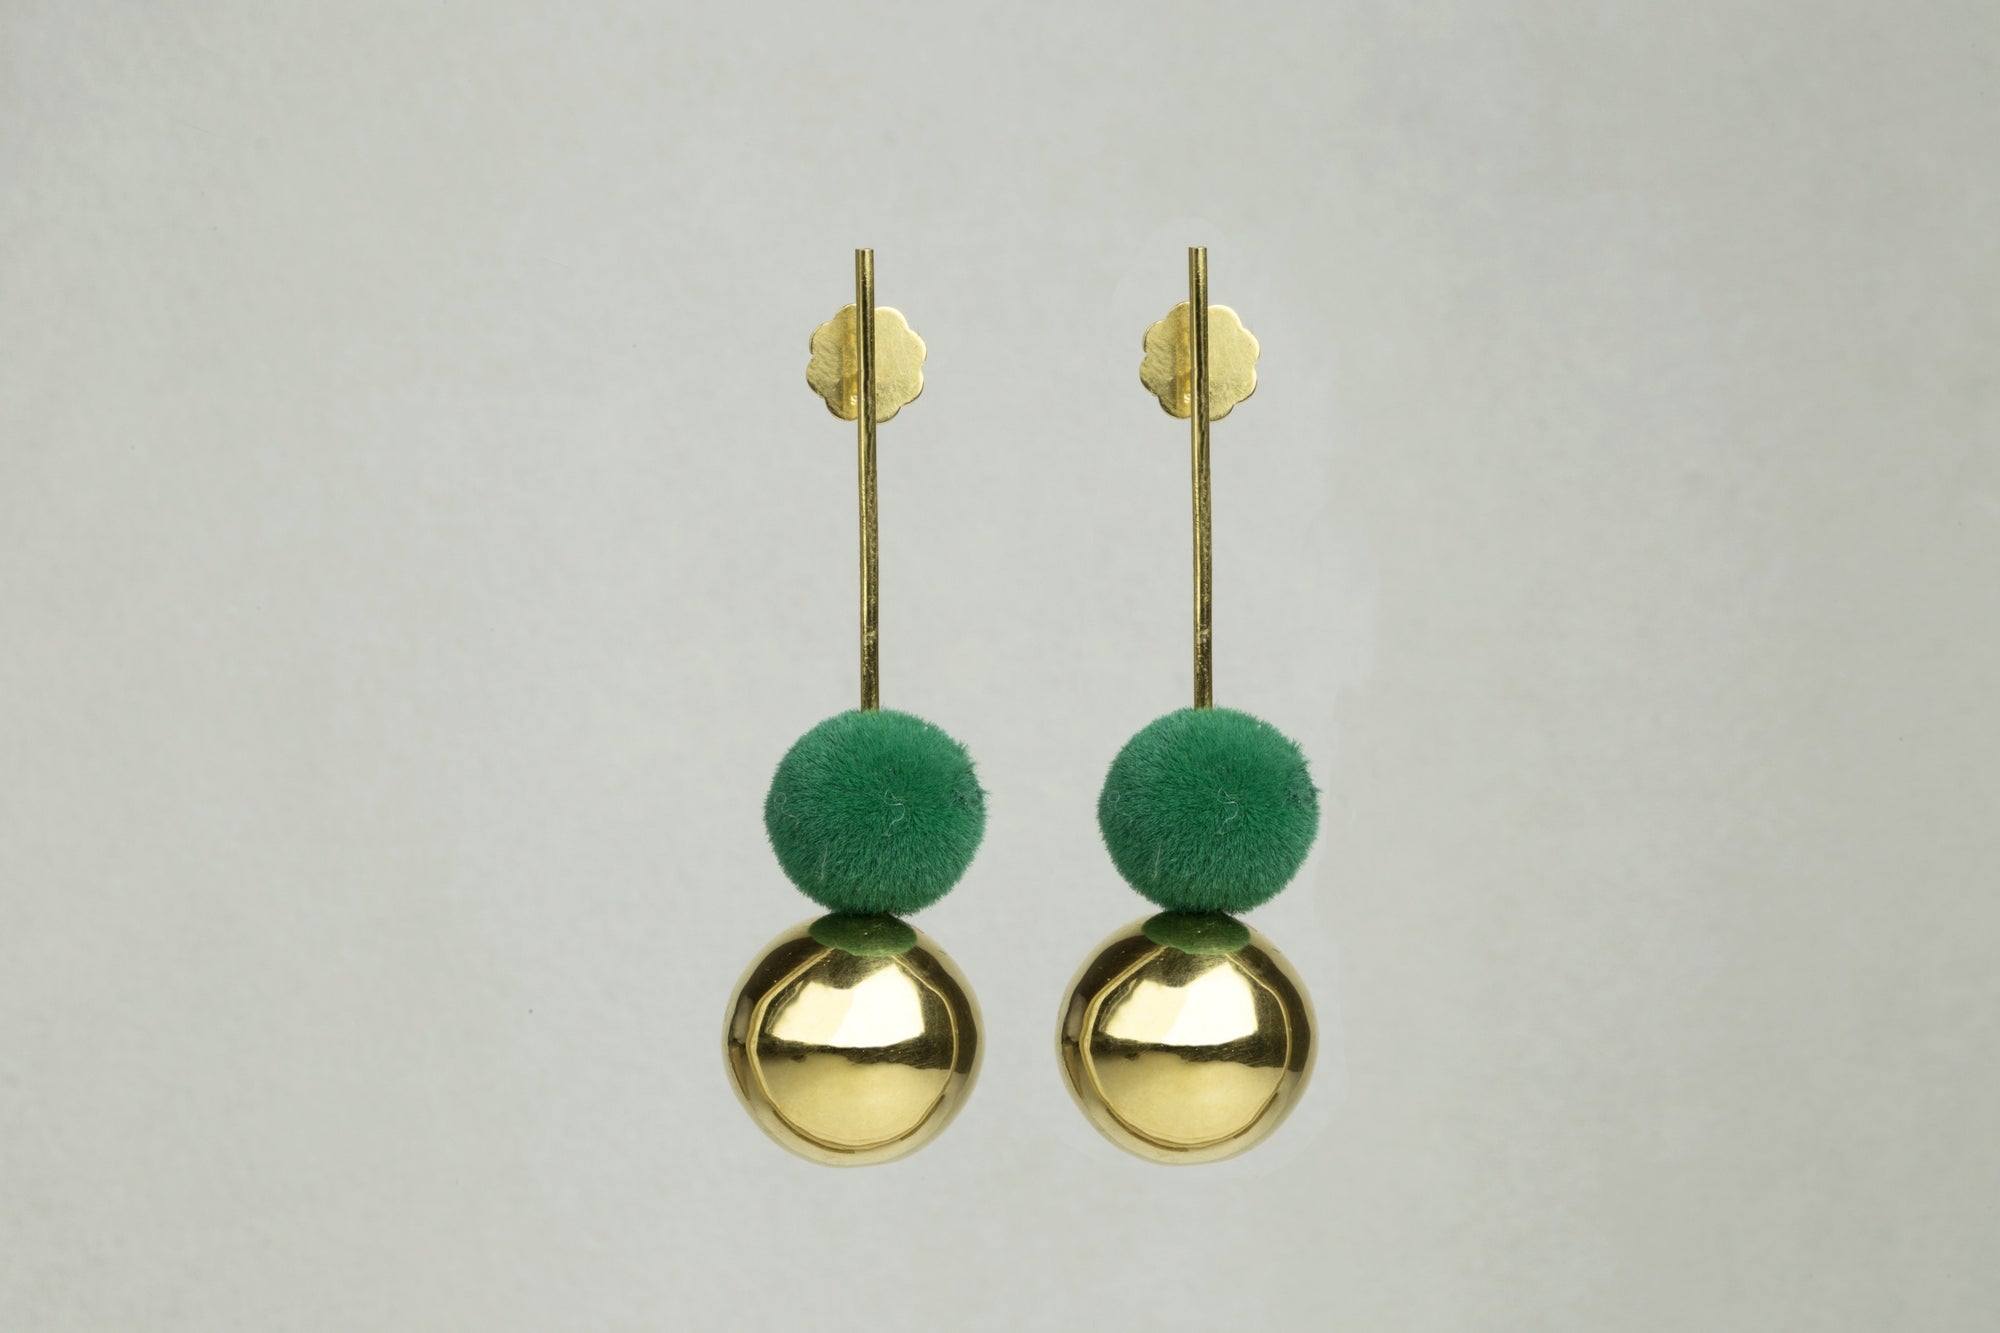 Drop Earrings with Gold Orb and Green Pompom